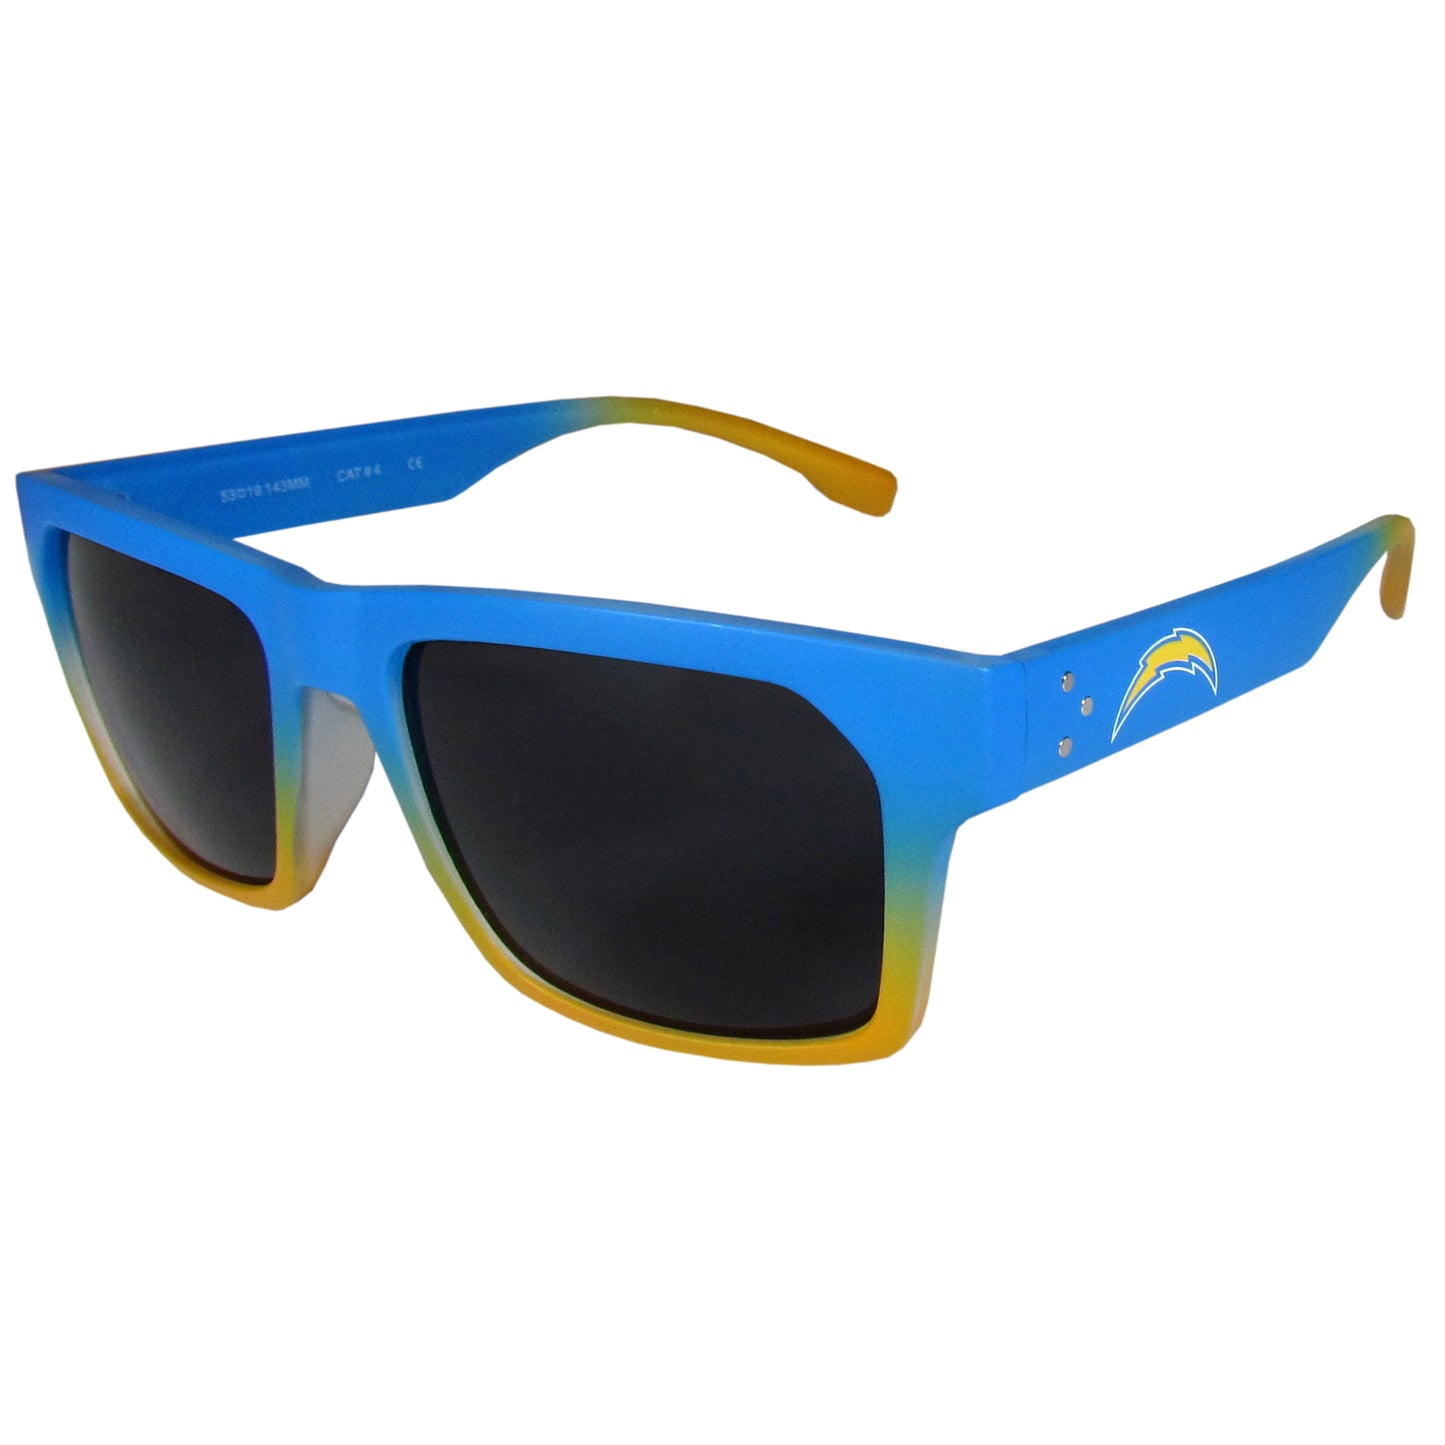 LOS ANGELES CHARGERS SPORTSFARER SUNGLASSES